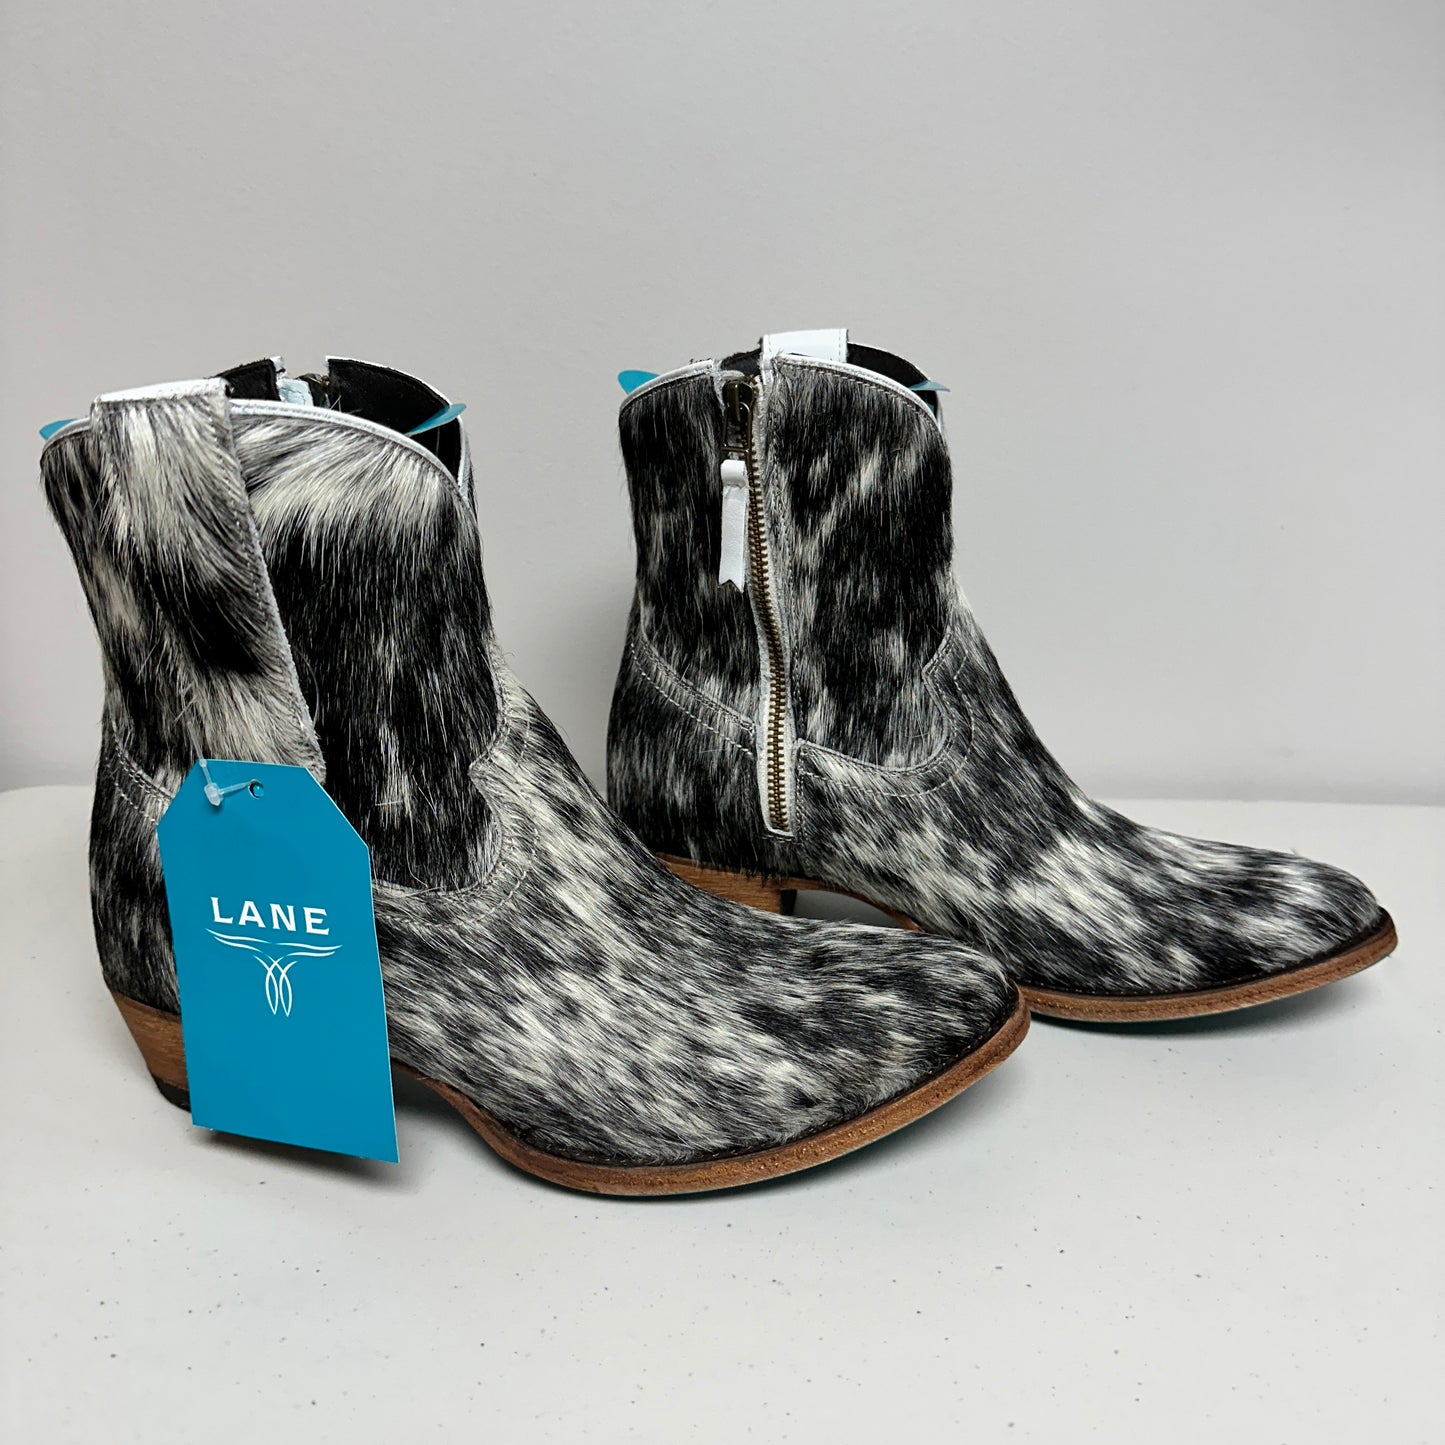 Plain Jane Bootie by Lane Boots, Cowpoke Cowgirl Boots| Bourbon Cowgirl